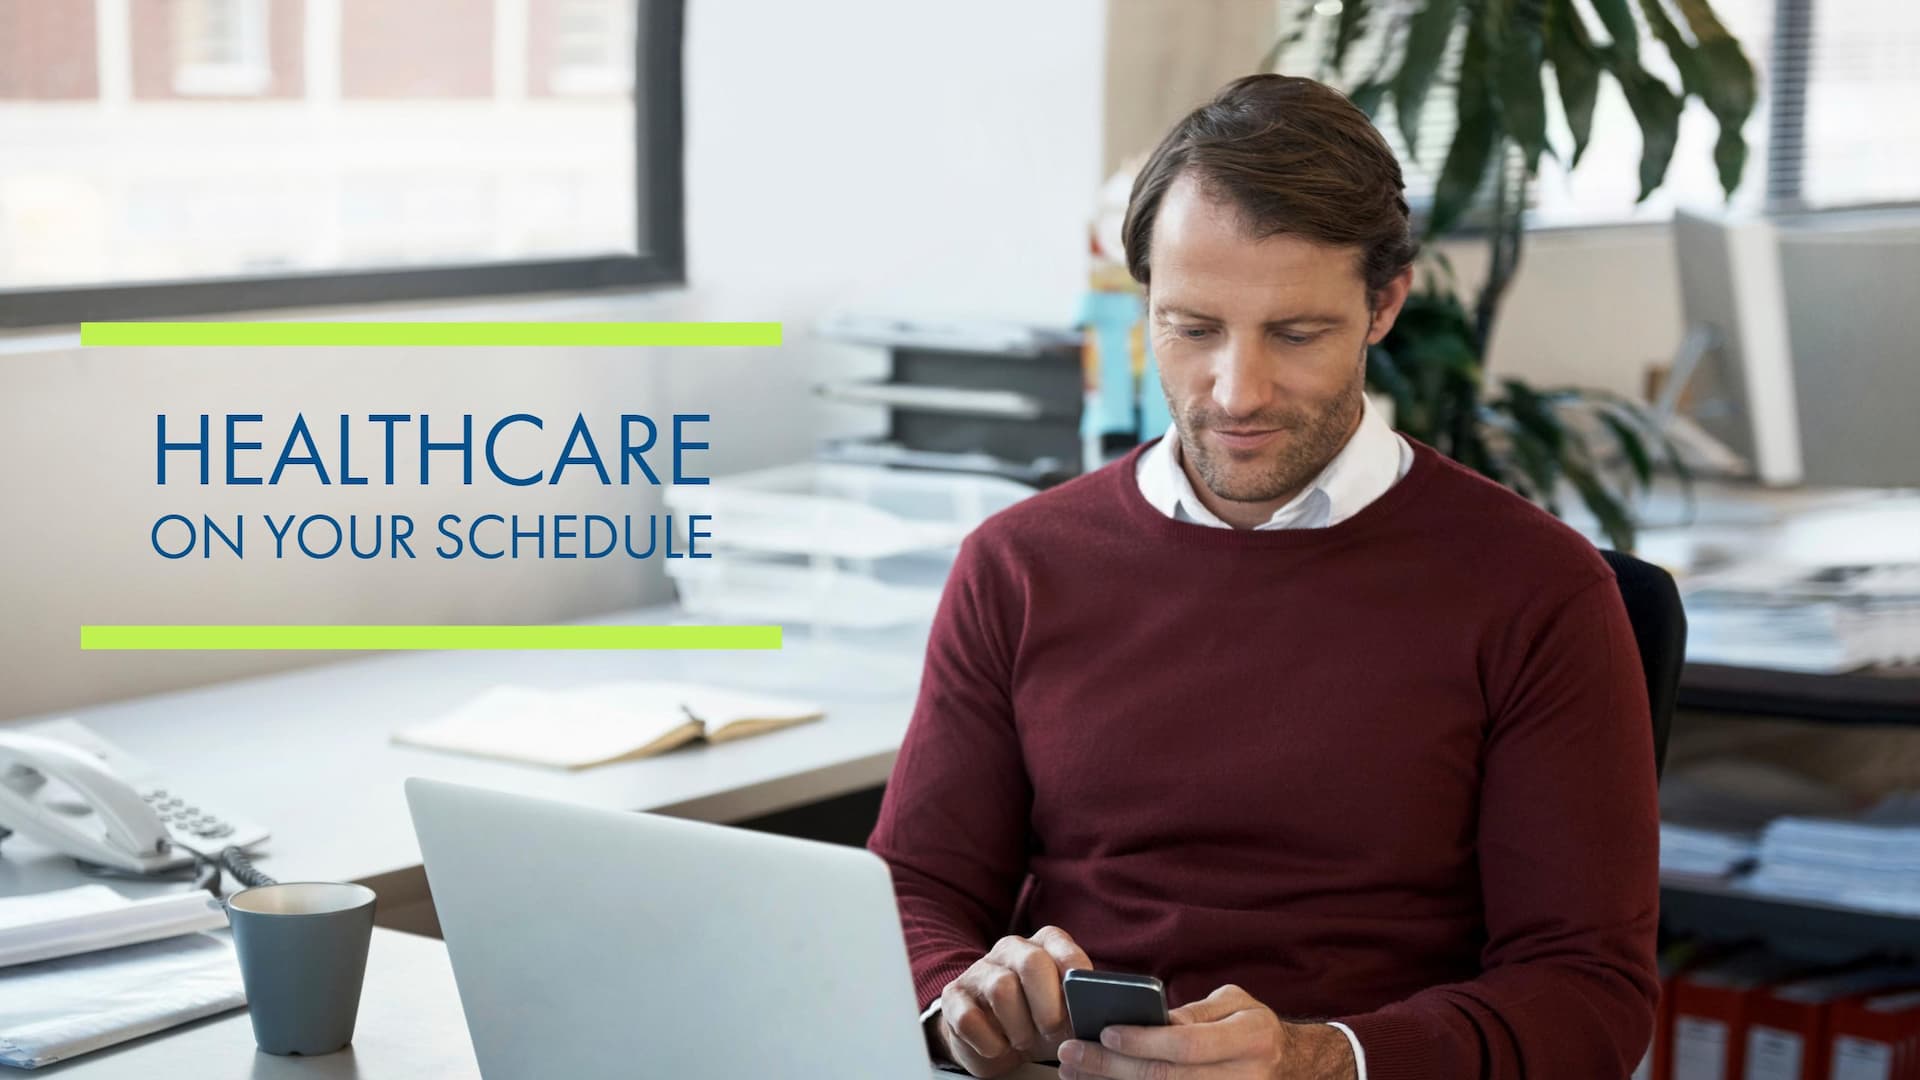 Illness is Inconvenient; Getting Medical Care Shouldn’t Be. Connect Care is Healthcare around Your Schedule.